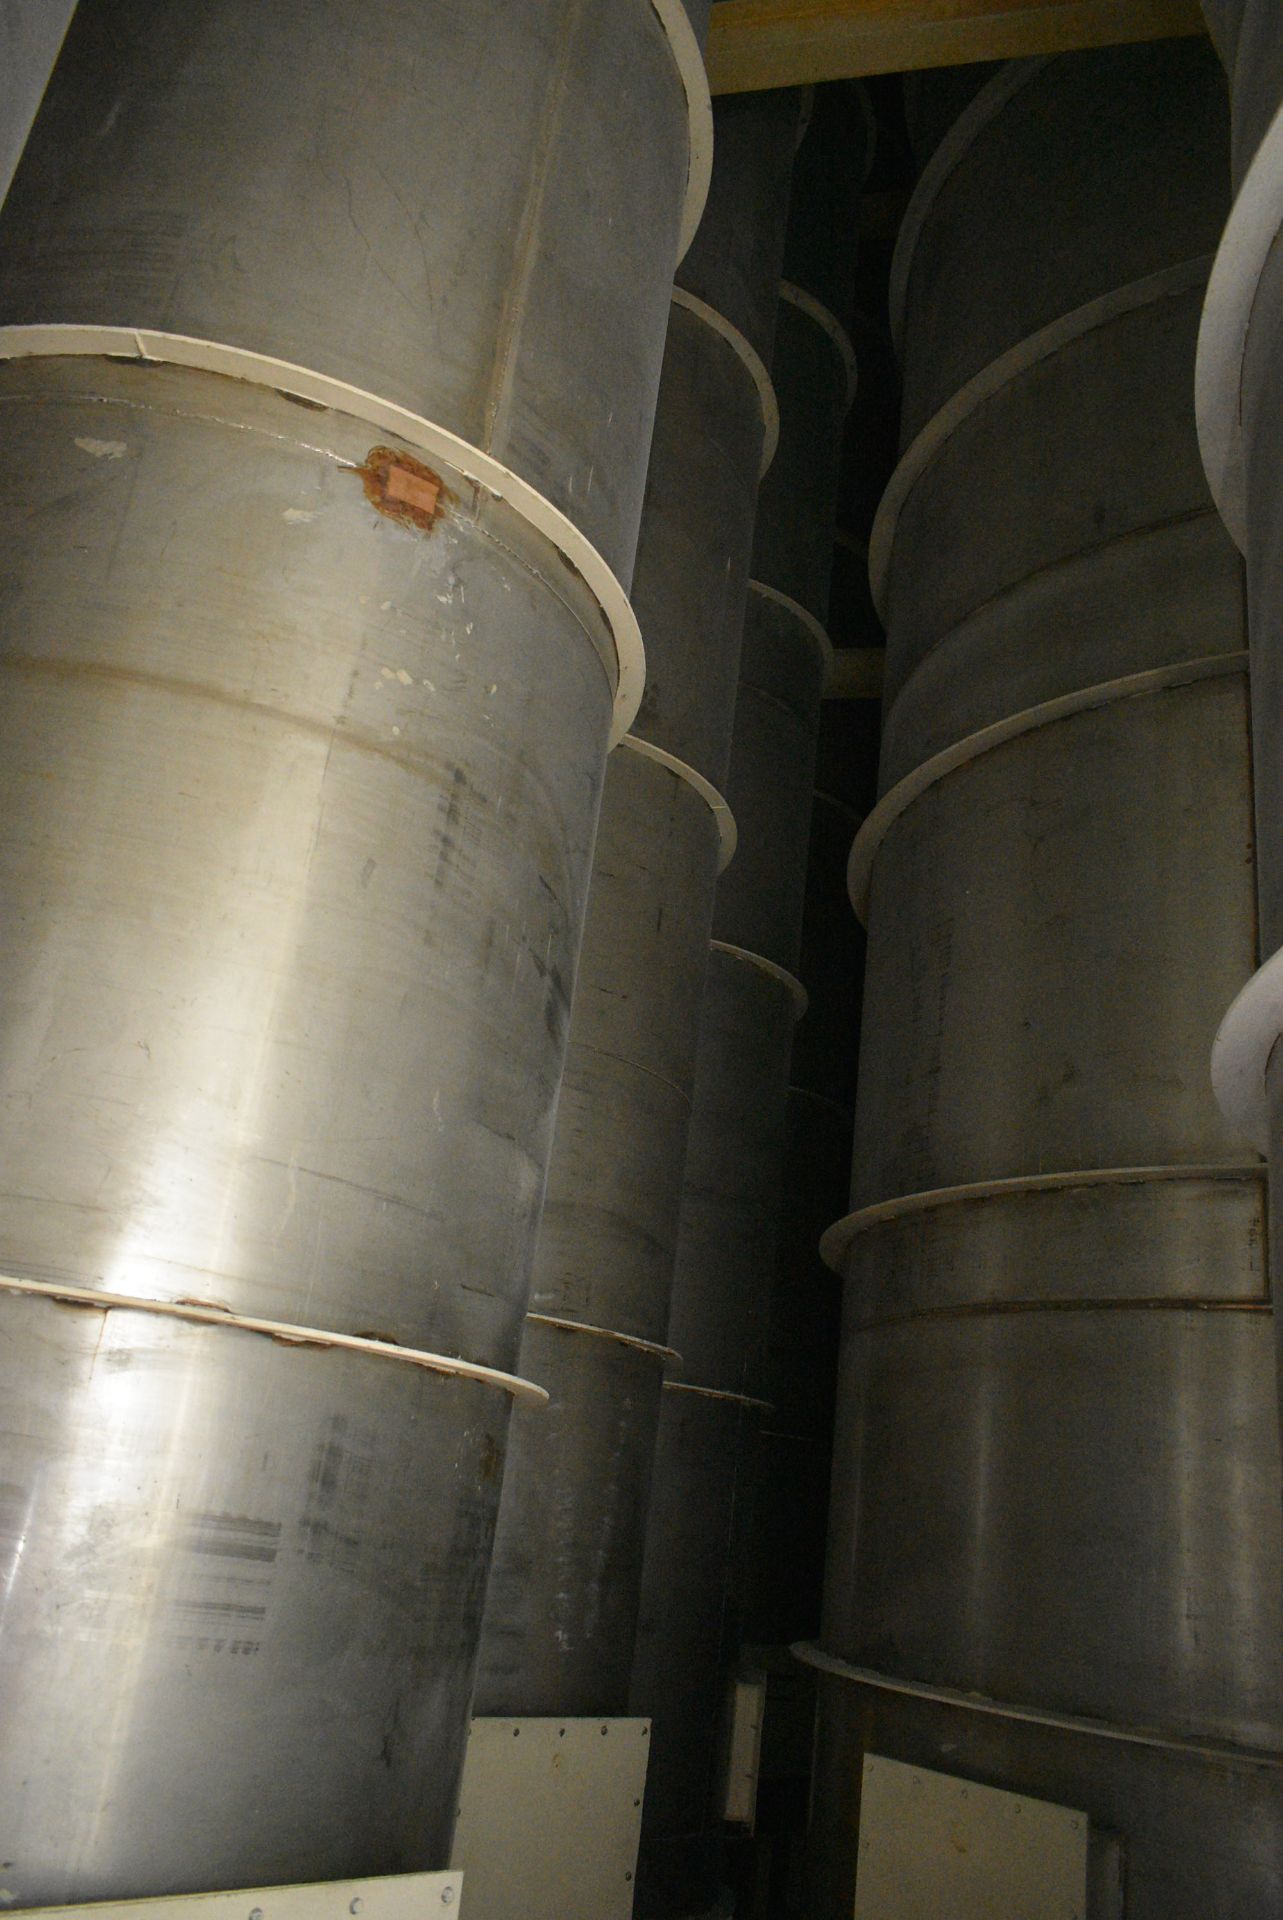 NEST OF NINE STAINLESS STEEL FLOUR STORAGE BINS, comprising two x 50 tonne cap., one x 25 tonne - Image 2 of 8